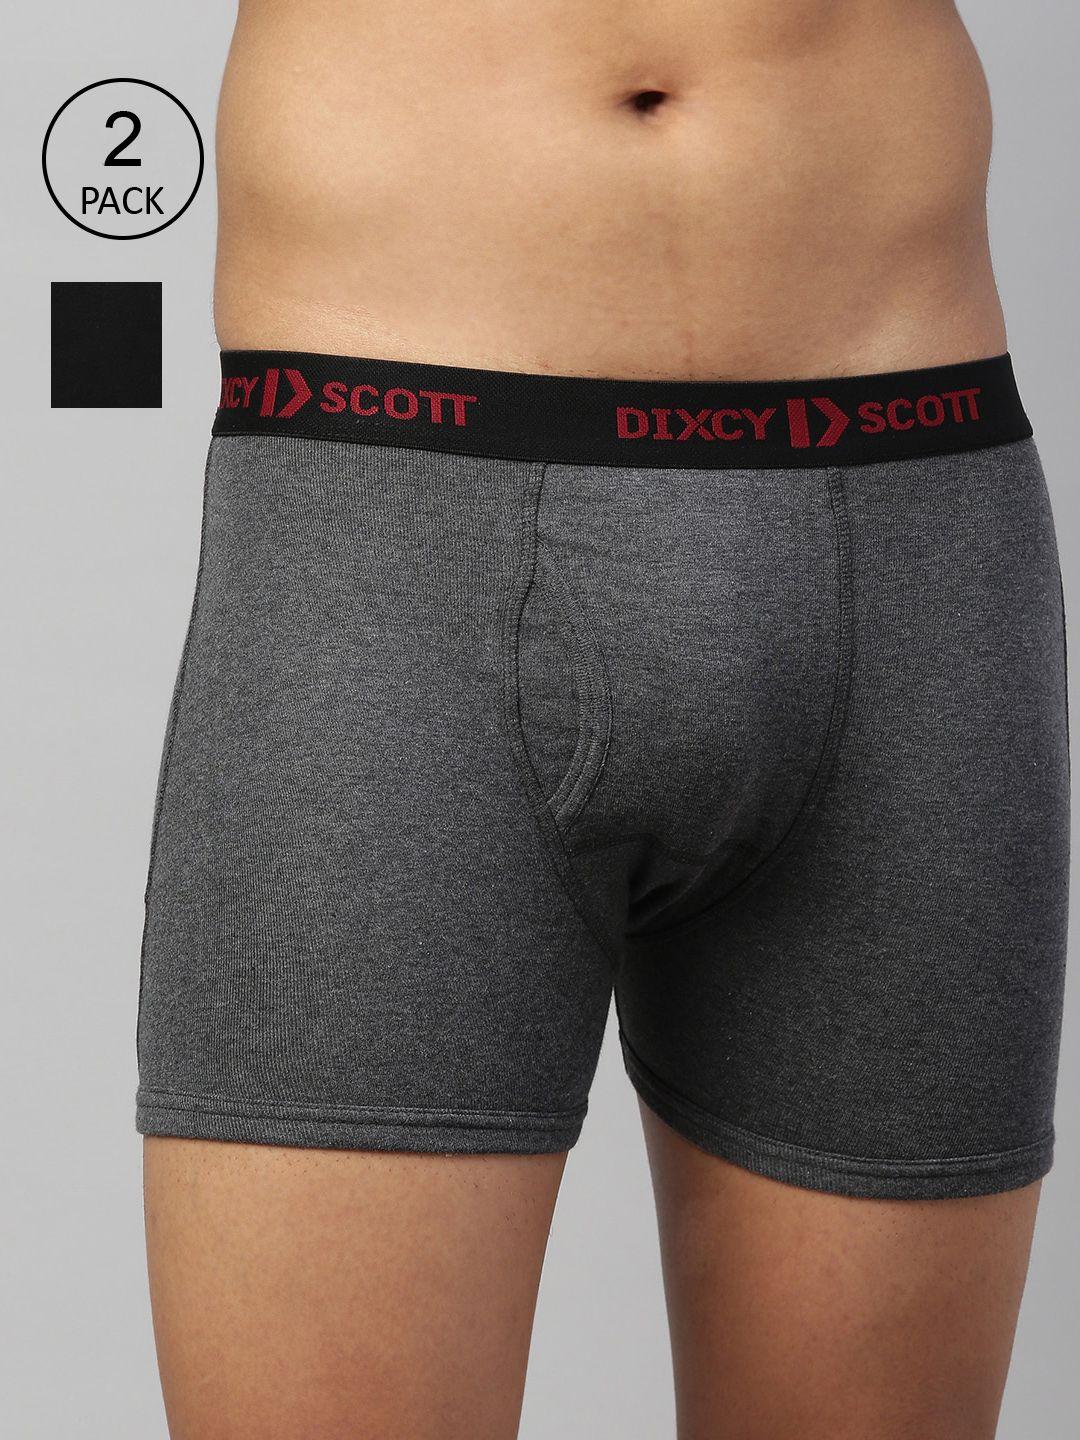 dixcy-scott-maximus-men-pack-of-2-solid-cotton-trunks-maxt-003-kinetic-trunk-p2